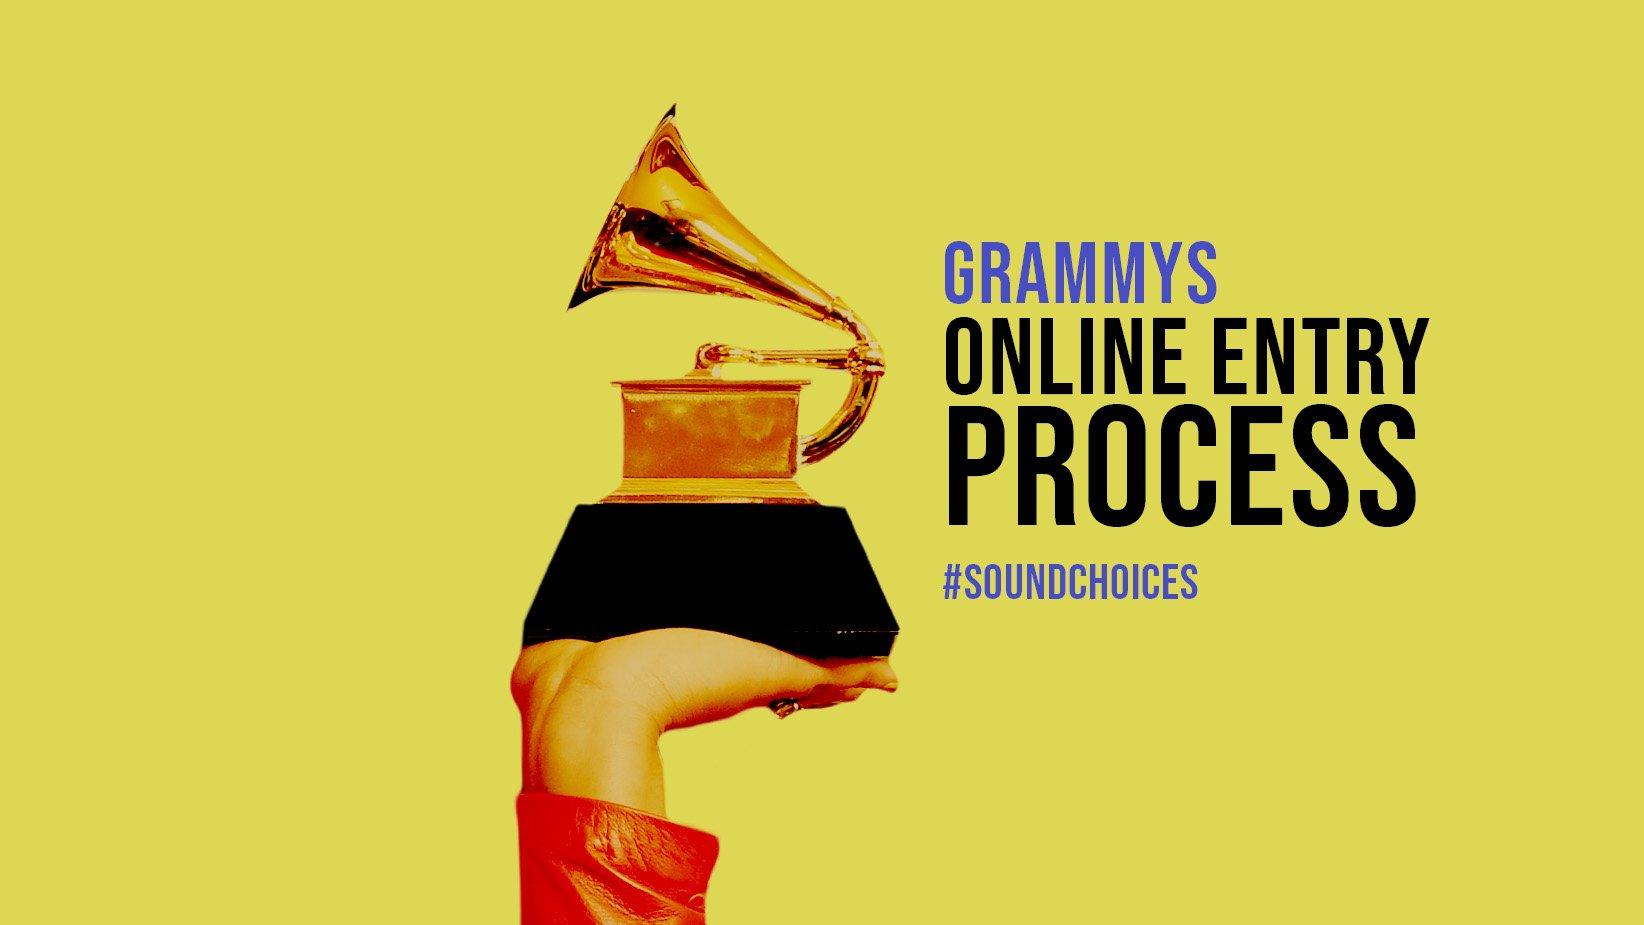 A photo of a person's hand holding a GRAMMY Award statue. The words "GRAMMYS ONLINE ENTRY PROCESS #SOUNDCHOICES" are written in purple and black against a yellow background.